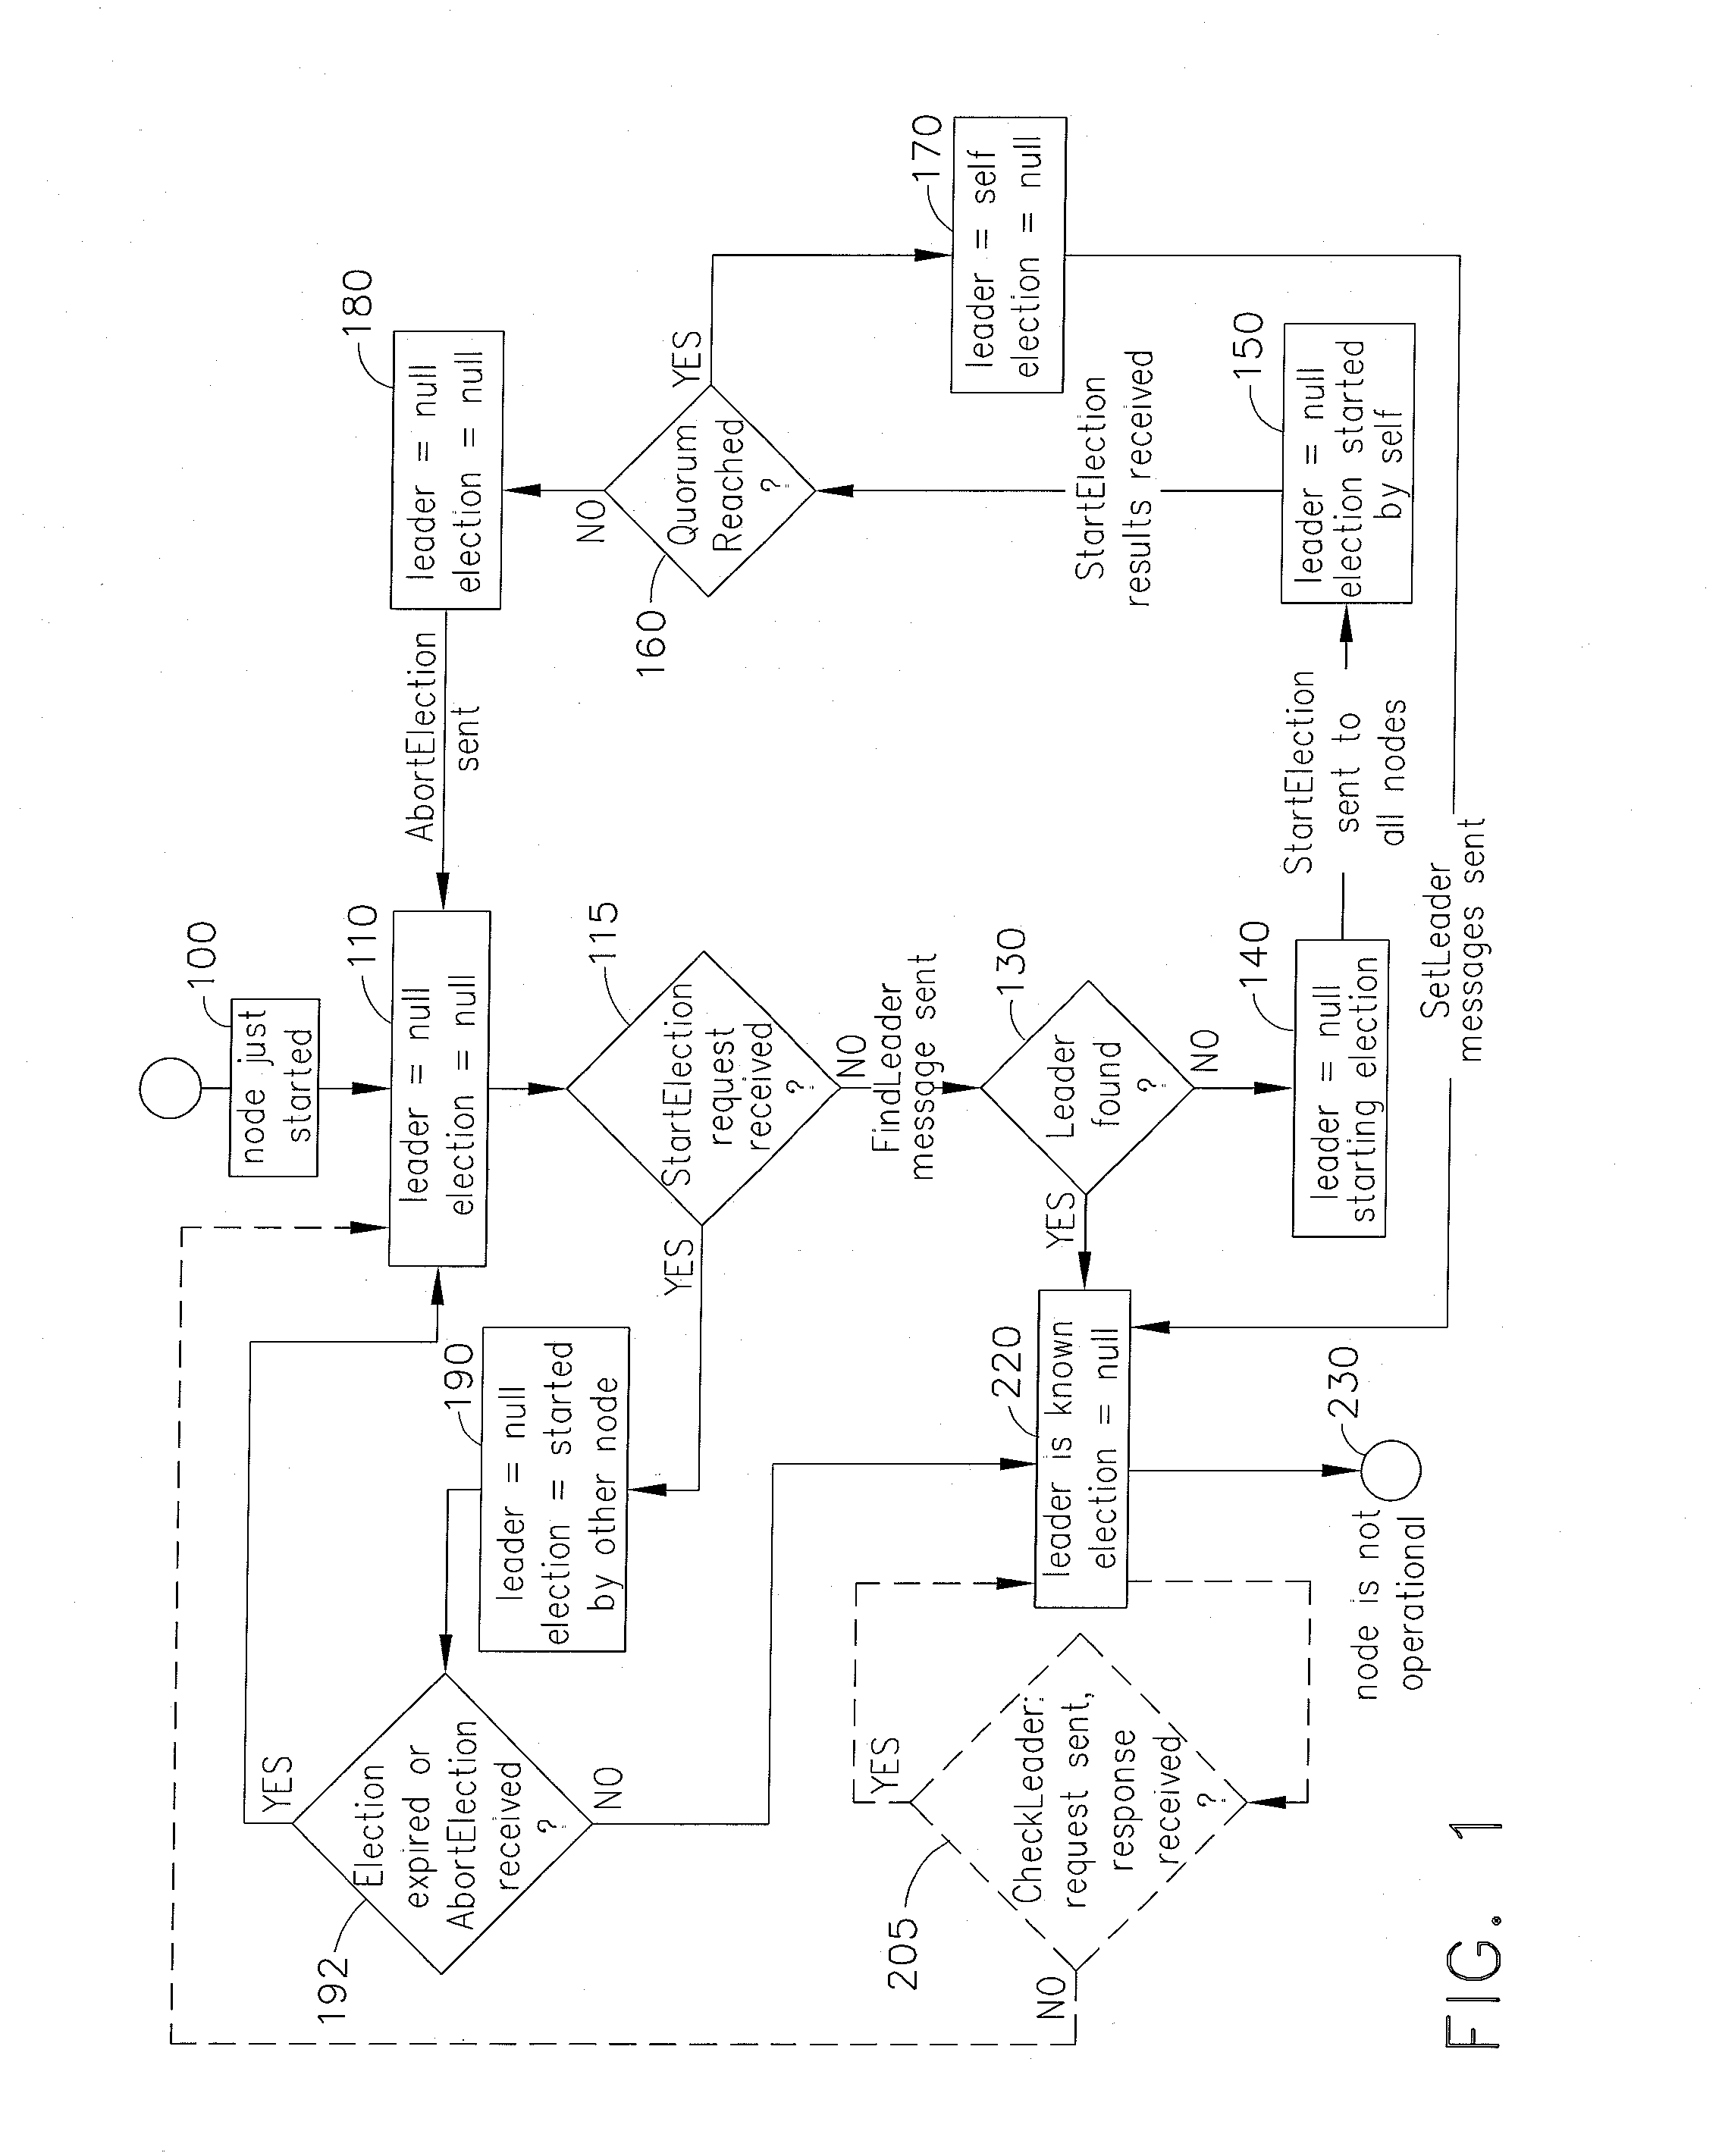 Systems and Methods of Providing Fast Leader Elections in Distributed Systems of Simple Topologies